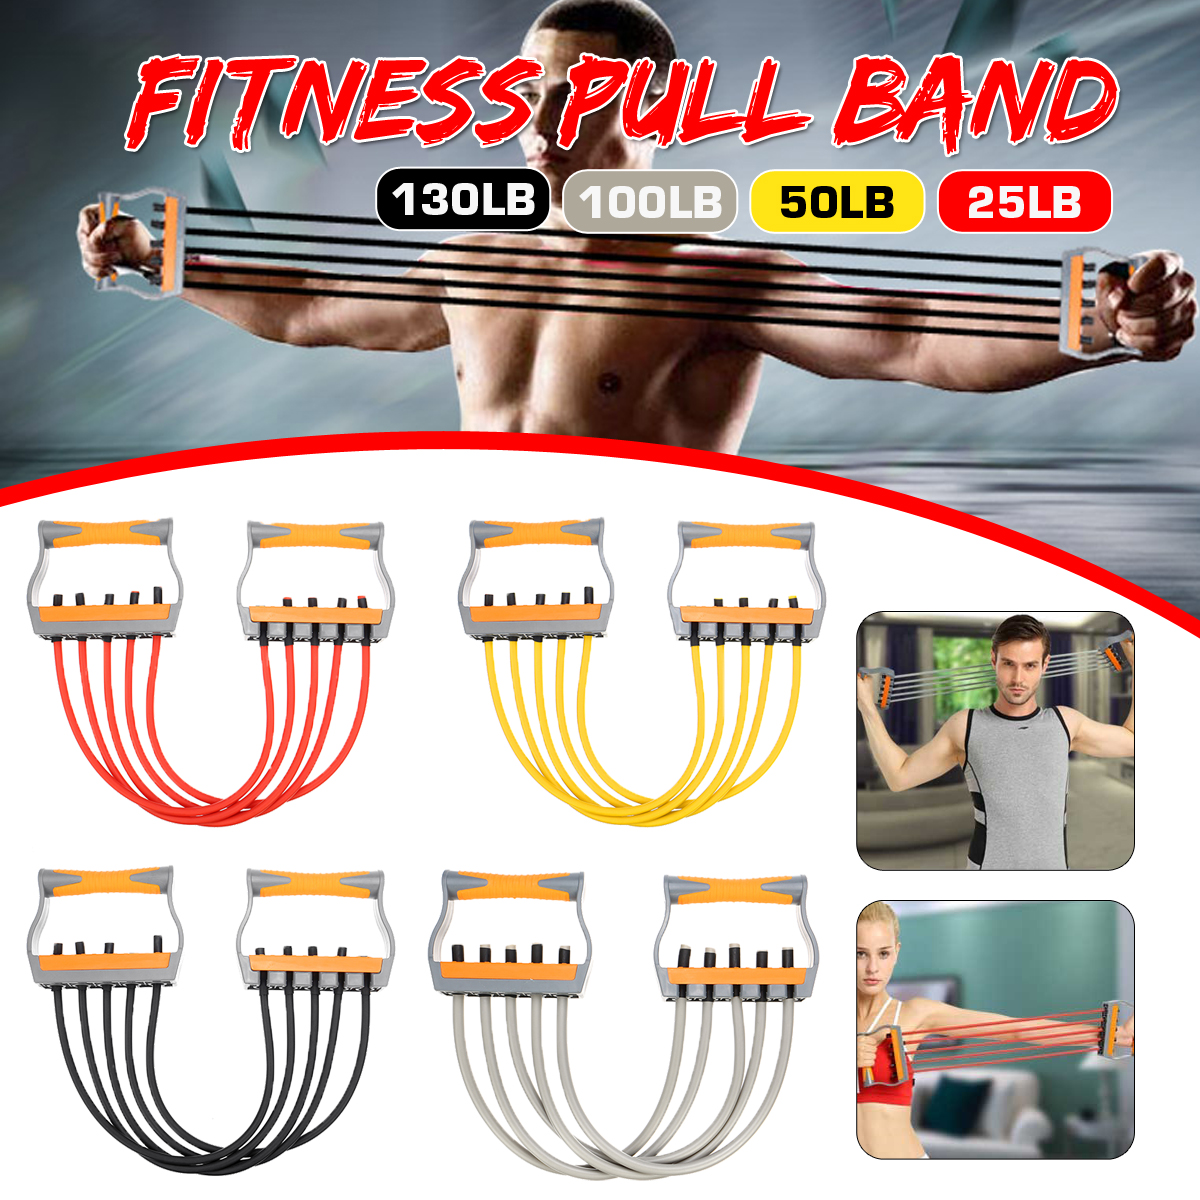 5-Tube-Fitness-Chest-Expander-Resistance-Bands-Arm-Pull-Bar-Fitness-Training-Exercise-Tools-1686609-1